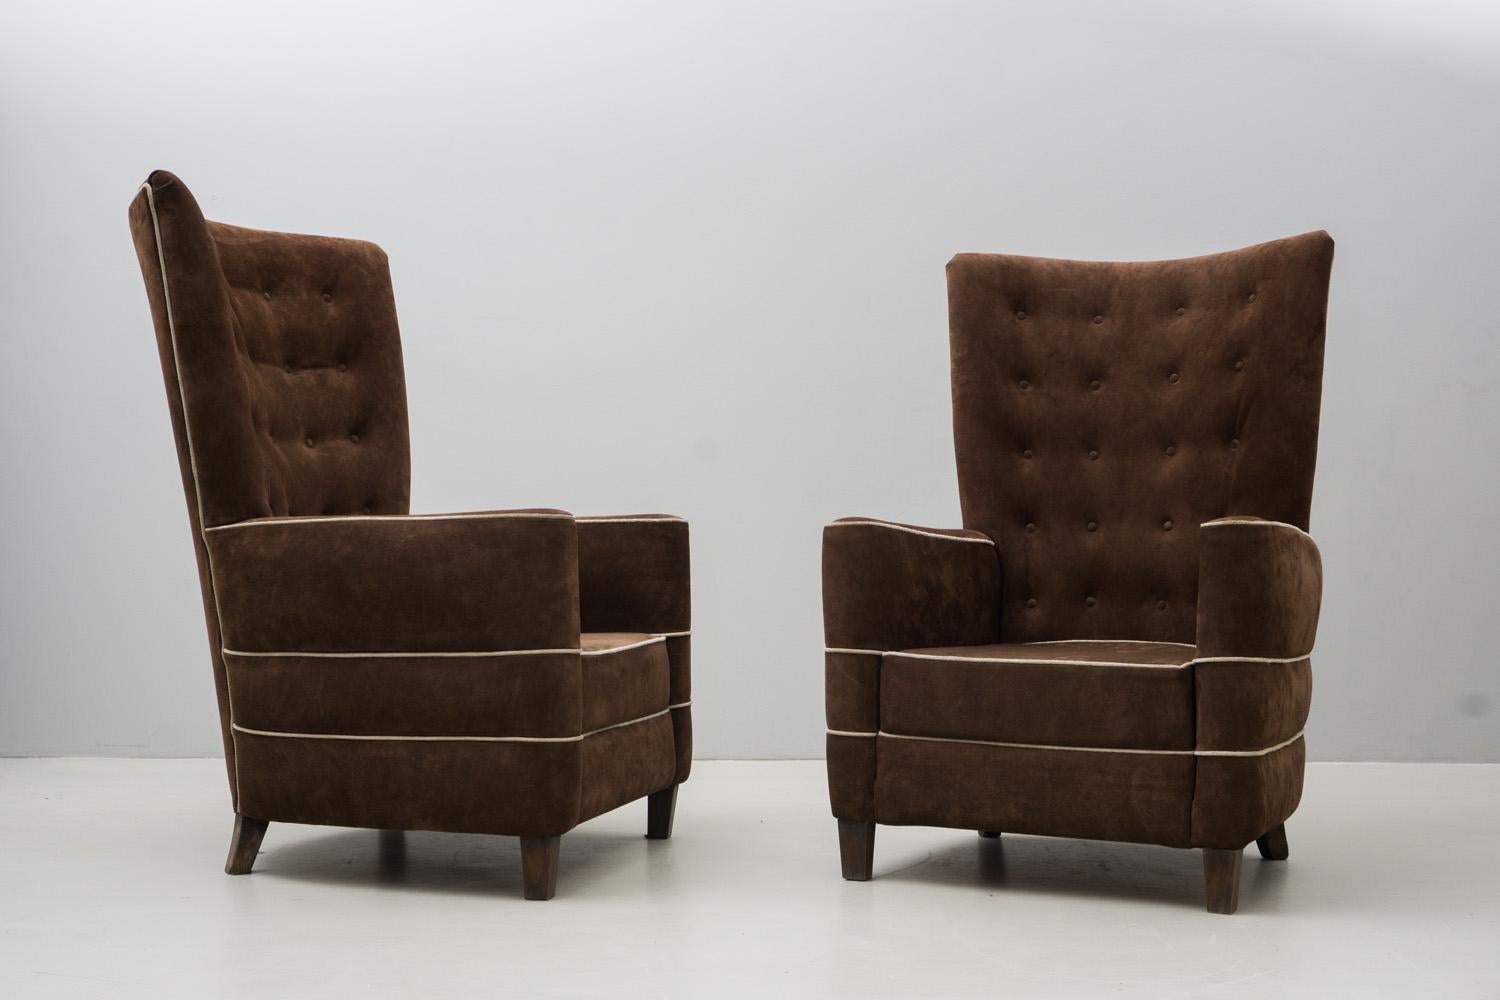 These rare armchairs by Guglielmo Ulrich have a solid and intimate feel. Covered with a brown suede, possibly reupholstered some time ago. Feet made of walnut.

Guglielmo Ulrich was born in Milan in 1904, the son of Albert and Luisa Battaglia. Of